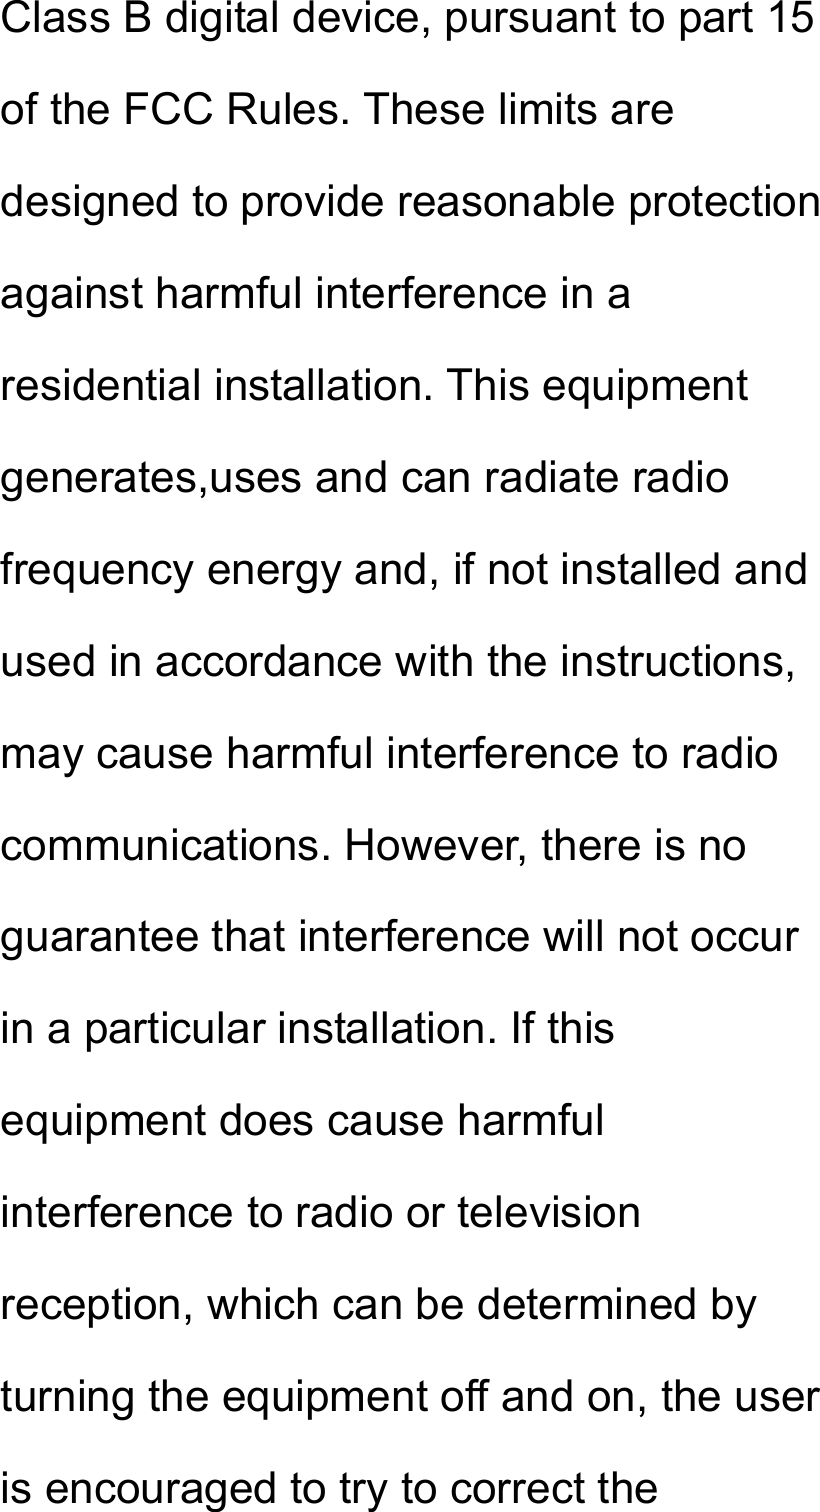 Class B digital device, pursuant to part 15 of the FCC Rules. These limits are designed to provide reasonable protection against harmful interference in a residential installation. This equipment generates,uses and can radiate radio frequency energy and, if not installed and used in accordance with the instructions, may cause harmful interference to radio communications. However, there is no guarantee that interference will not occur in a particular installation. If this equipment does cause harmful interference to radio or television reception, which can be determined by turning the equipment off and on, the user is encouraged to try to correct the 